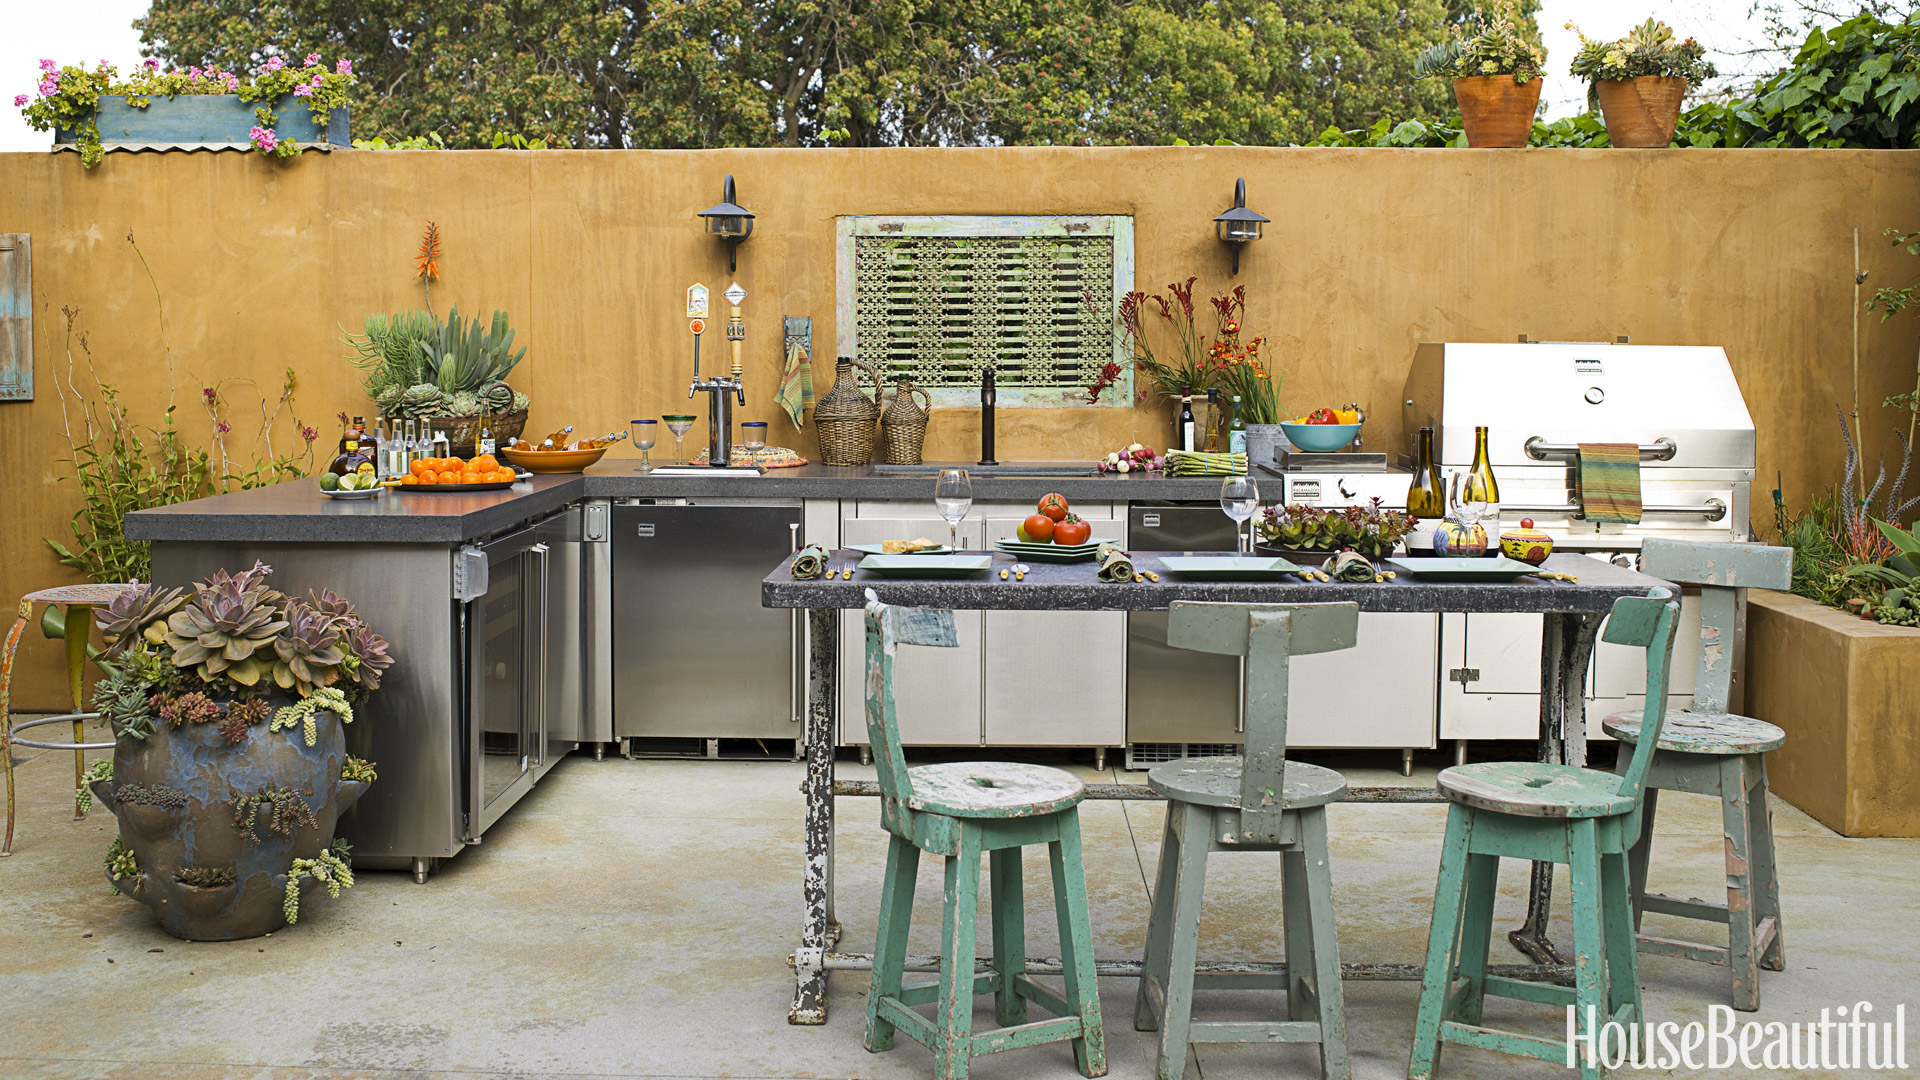 20 outdoor kitchen design ideas and pictures DJKYDFH